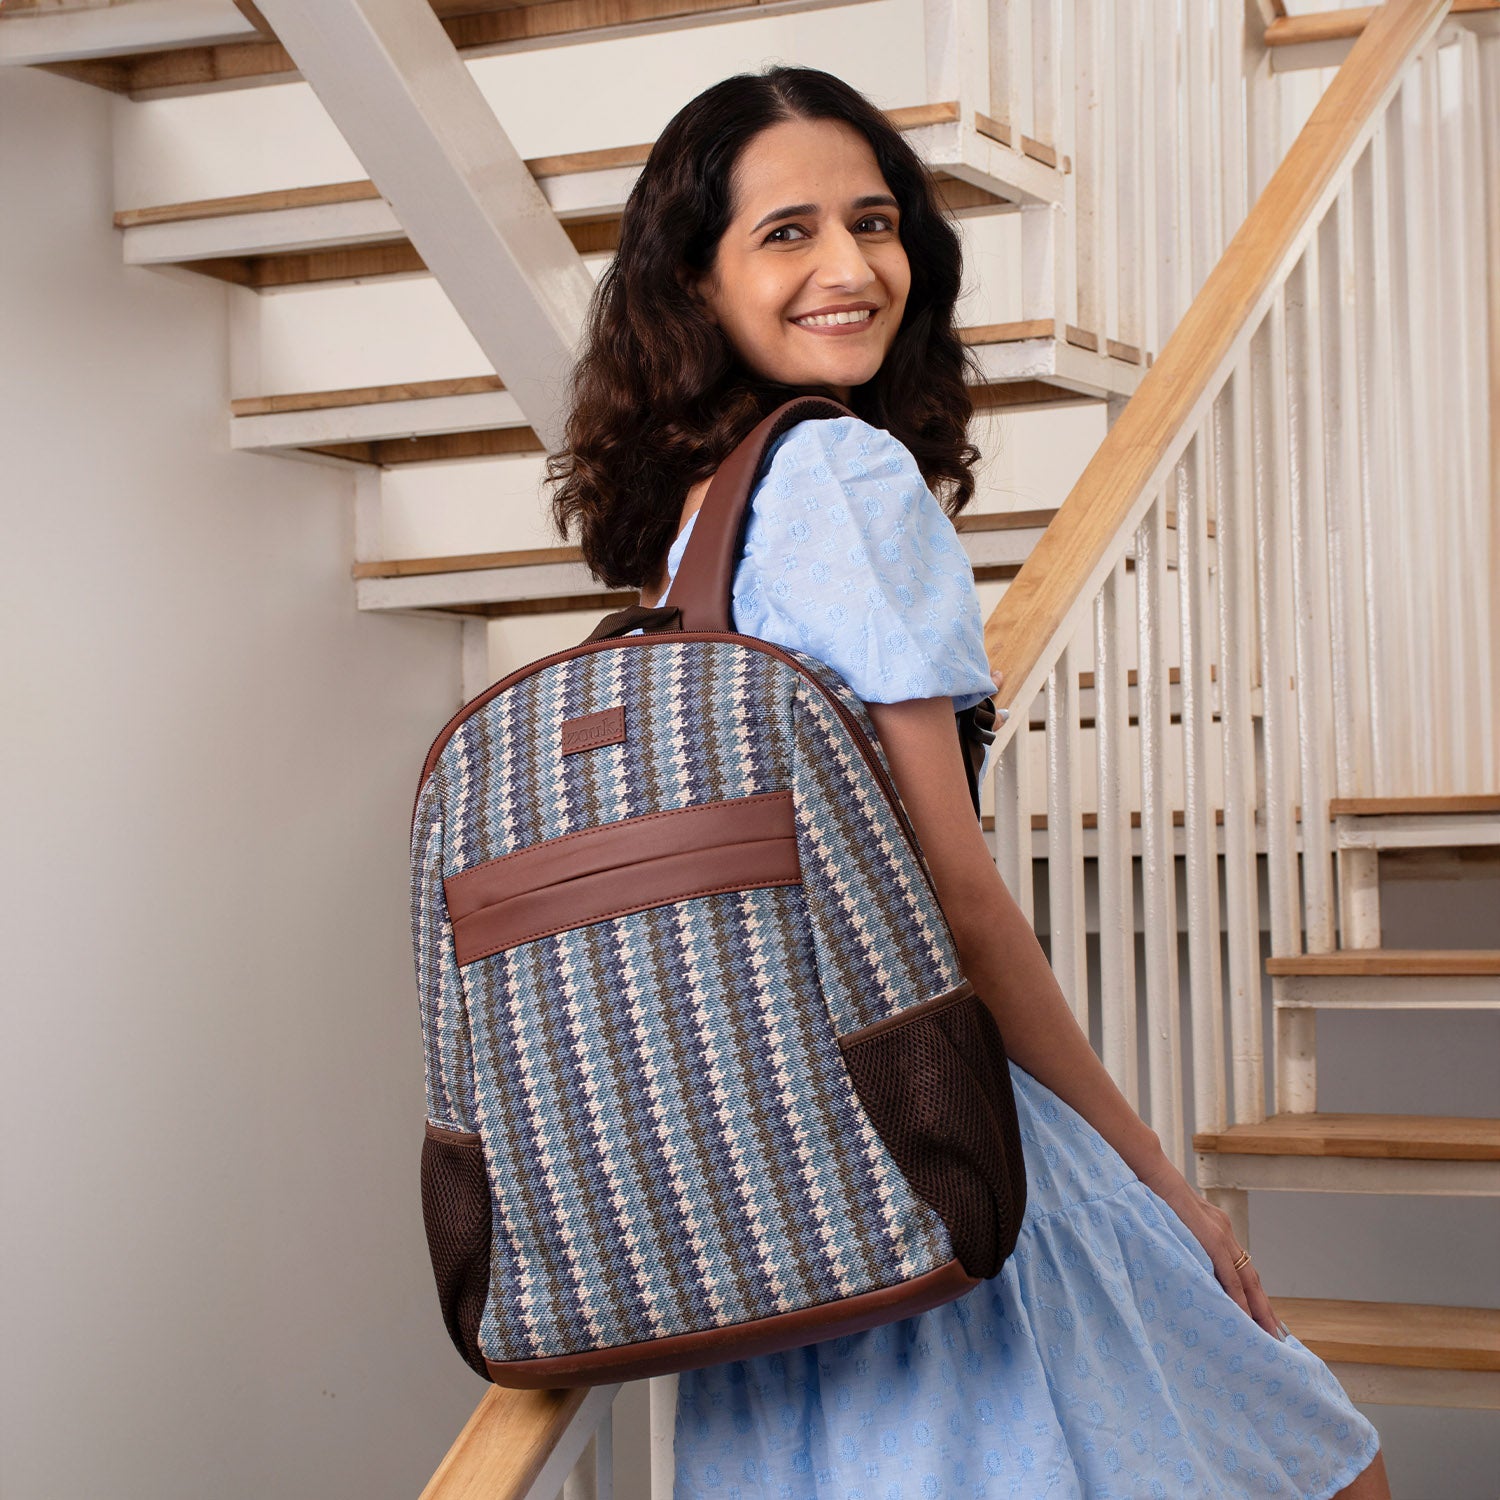 Bombay Houndstooth Classic Backpack